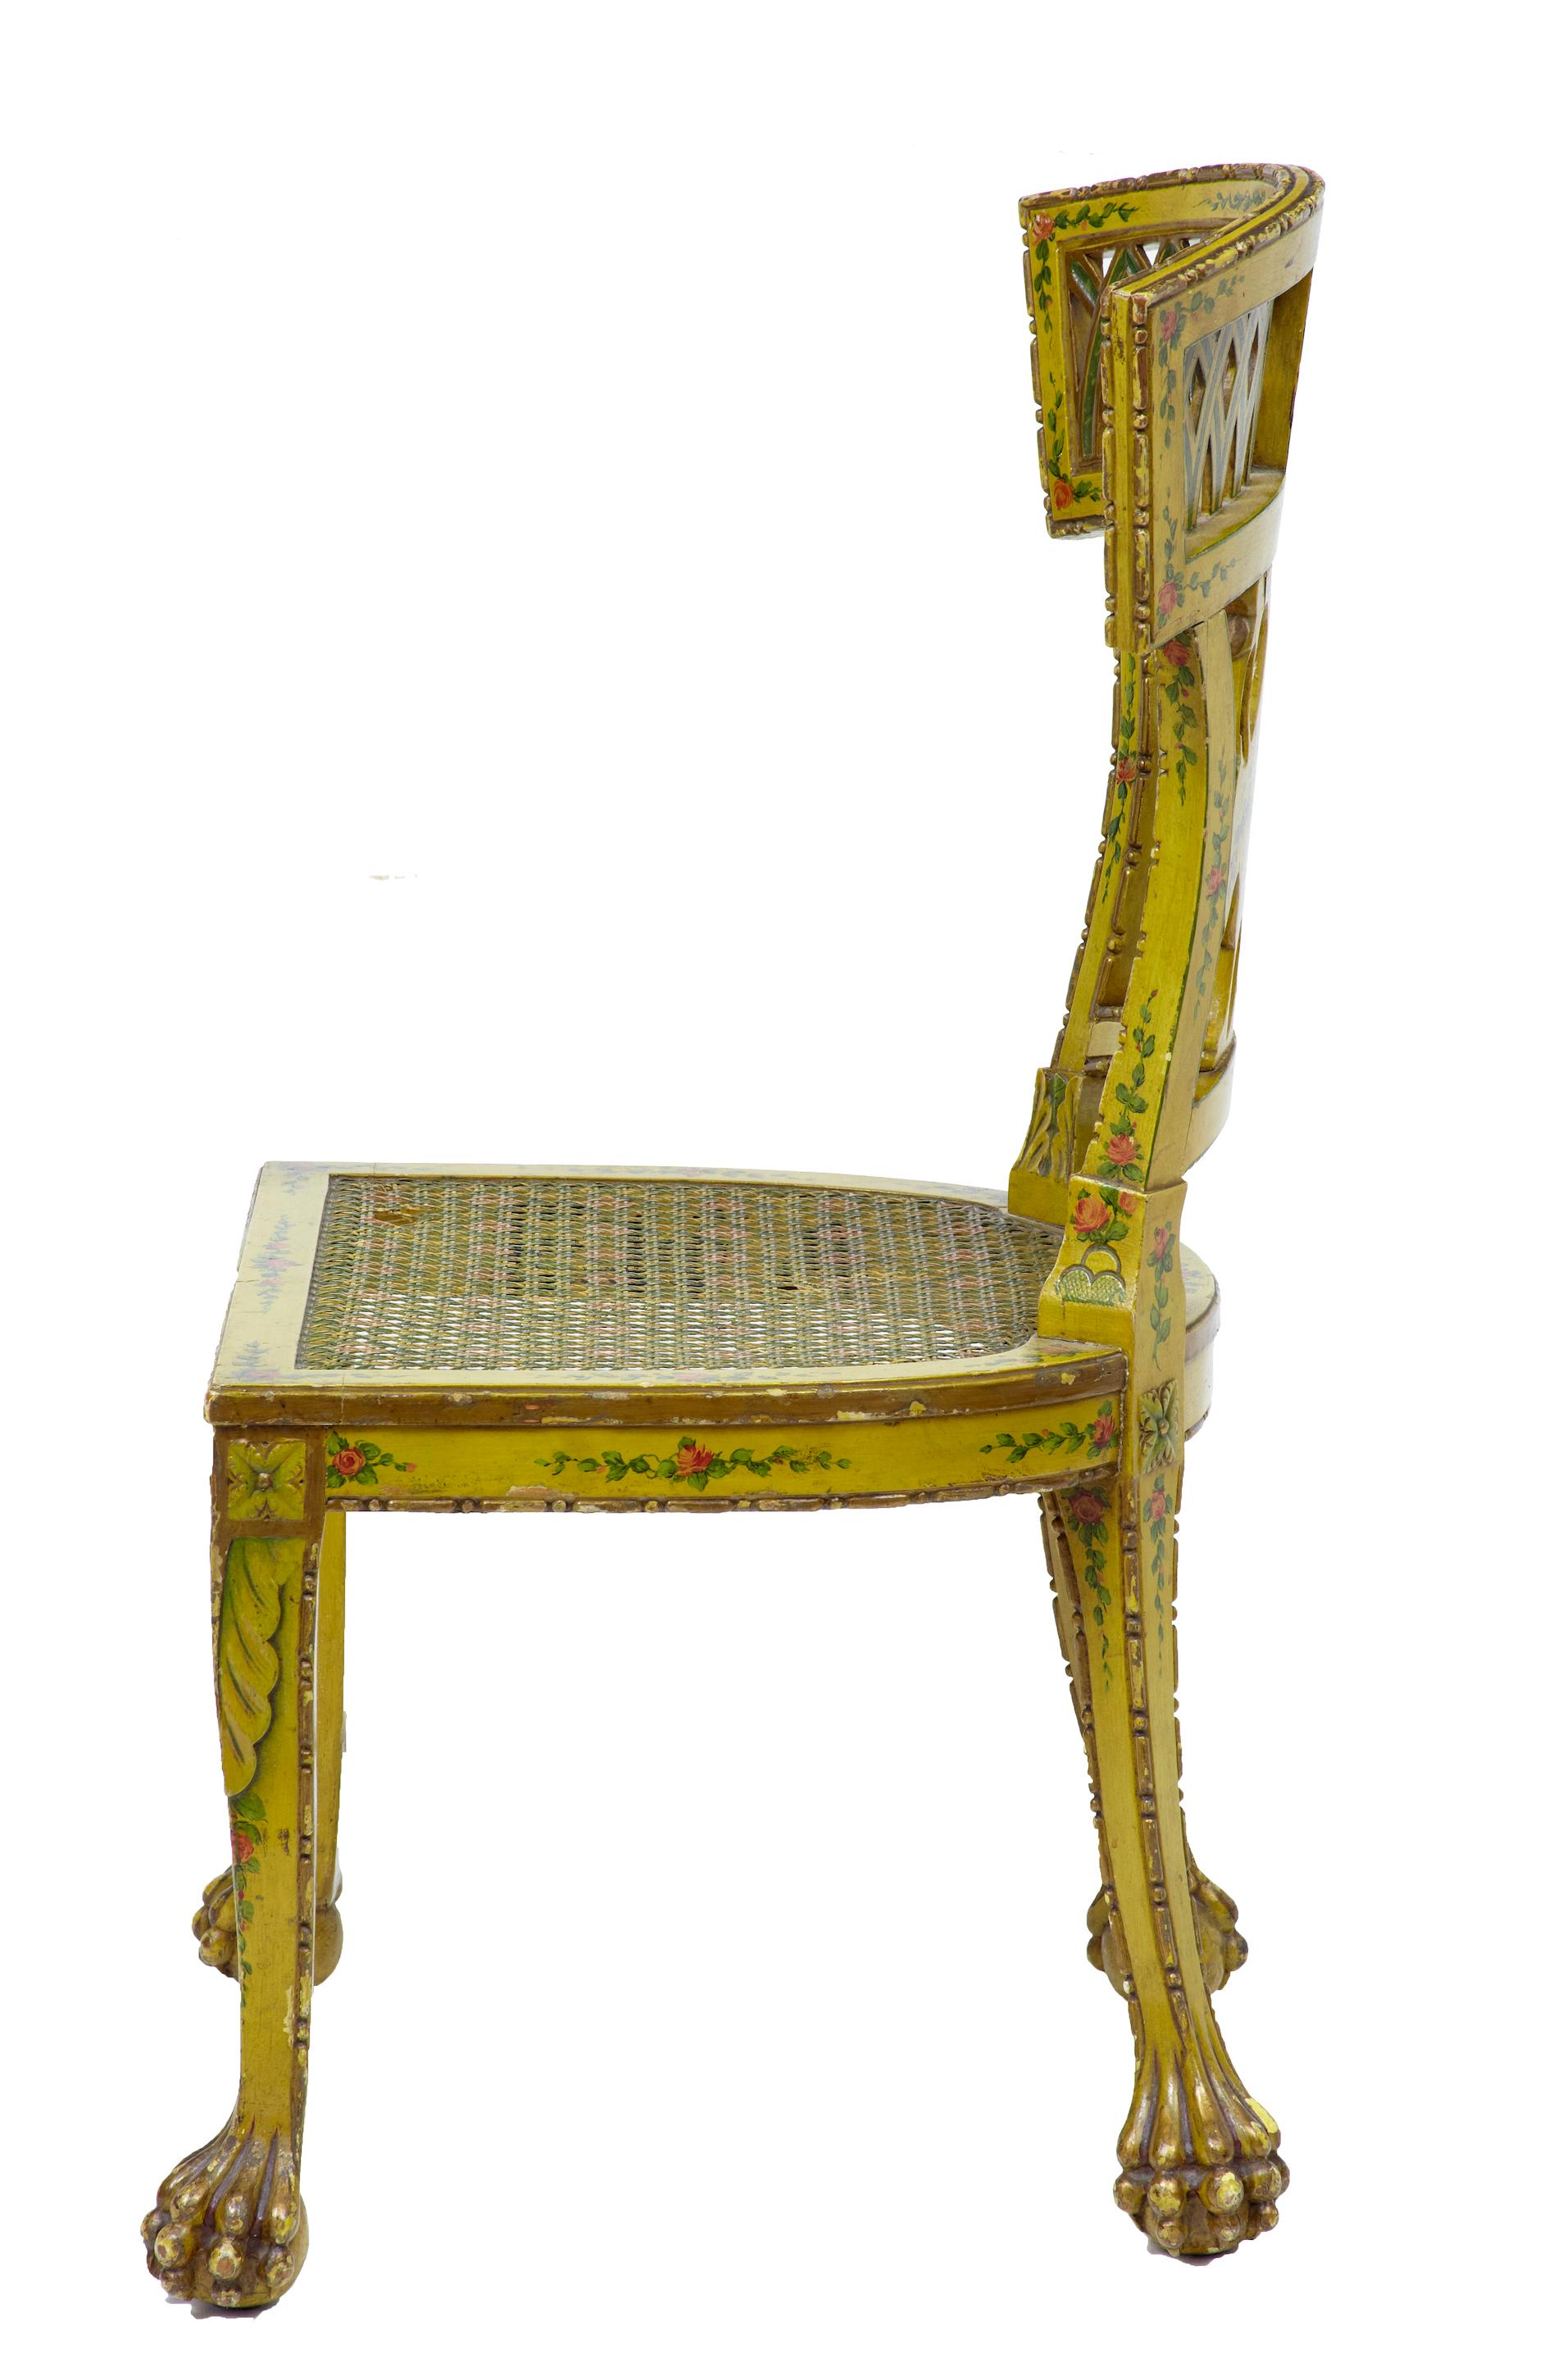 Austrian 19th Century Biedermeier Carved and Painted Cane Chair